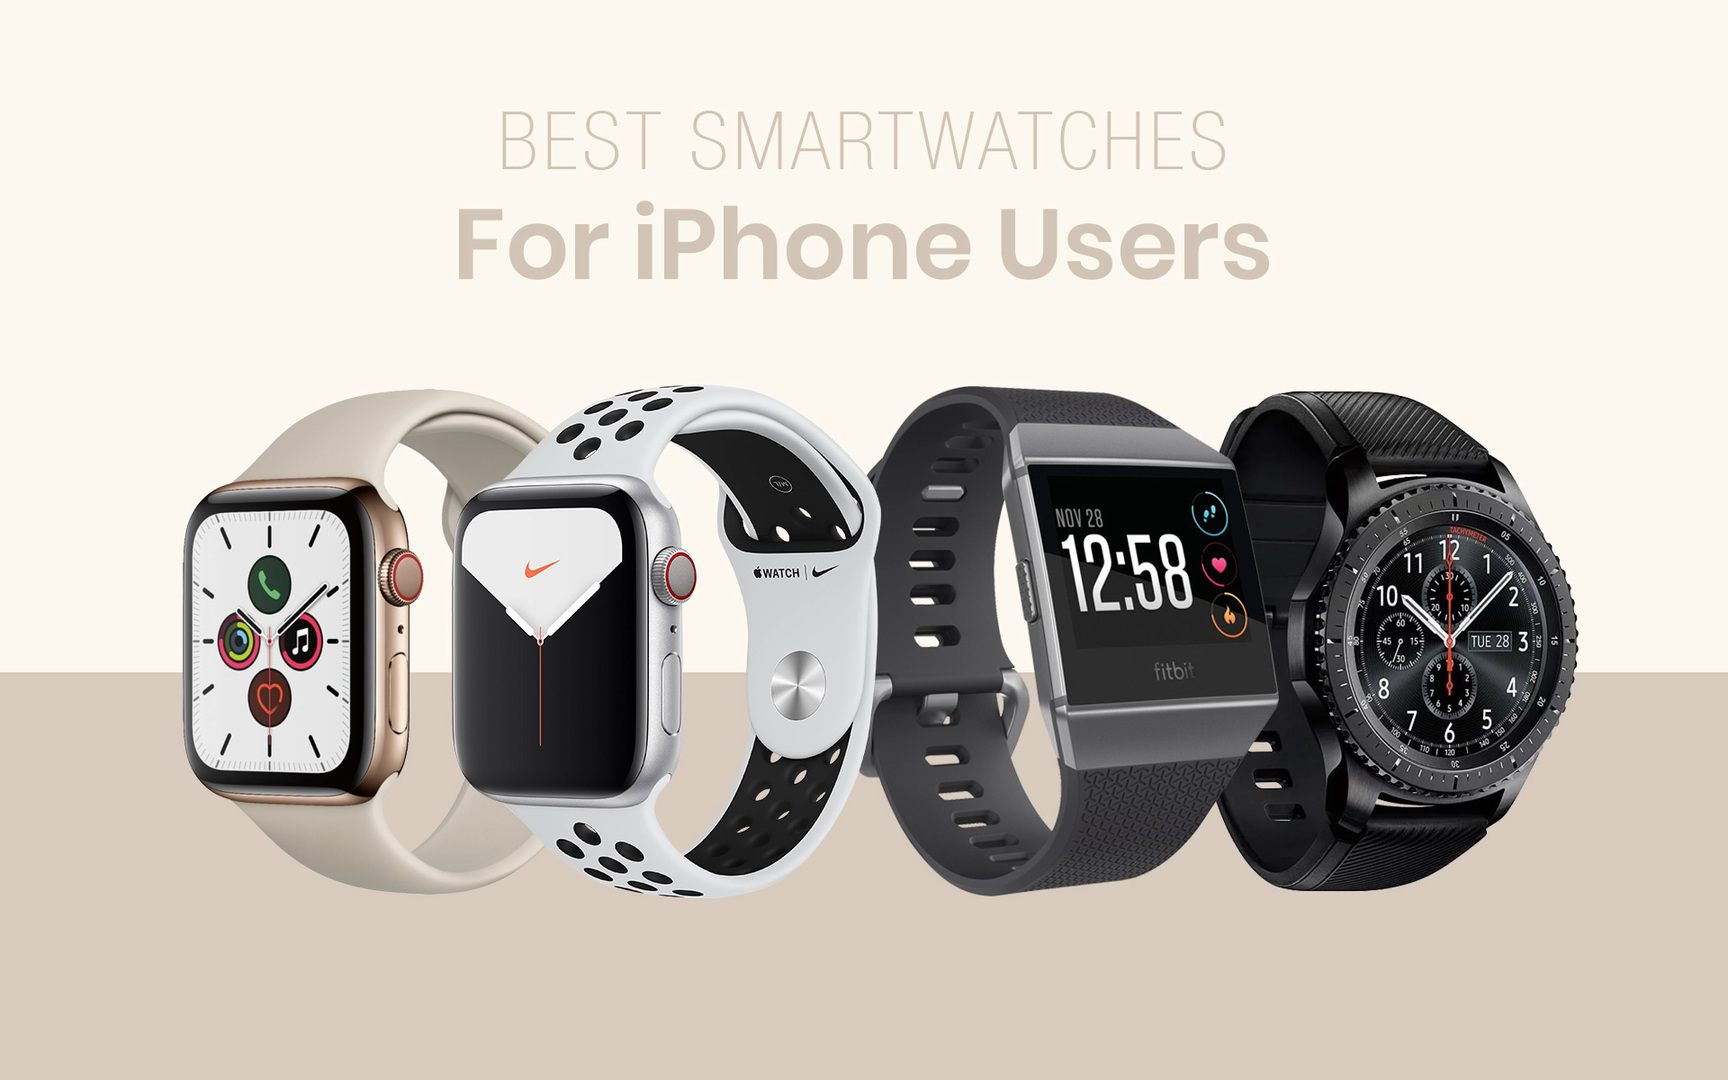 Best Smartwatches for iPhone Users